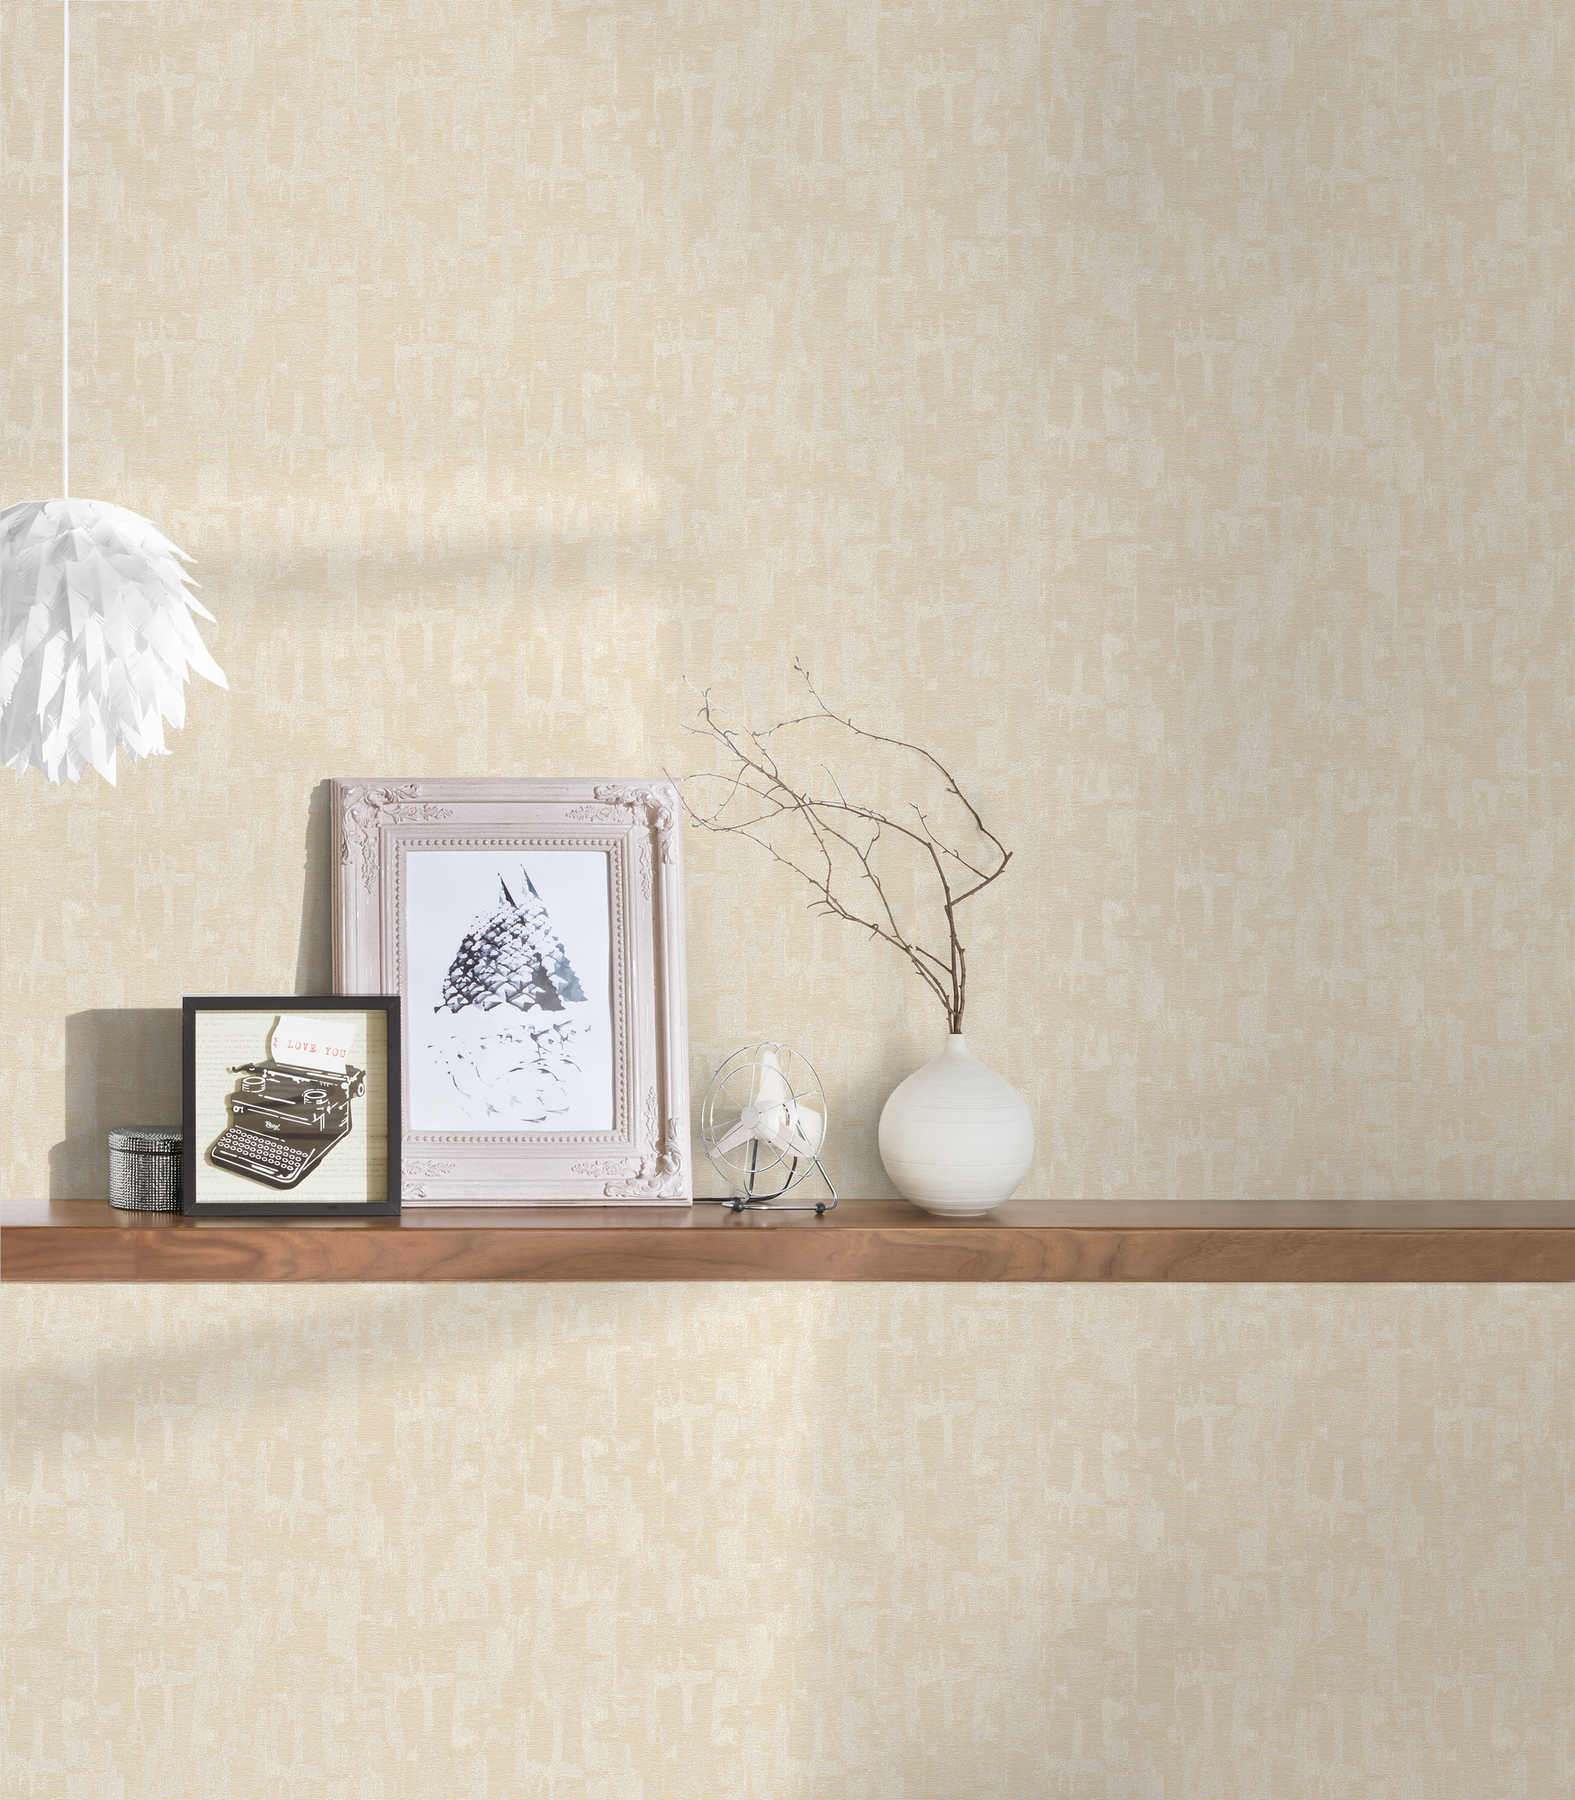             Retro wallpaper with abstract cream and beige pattern
        